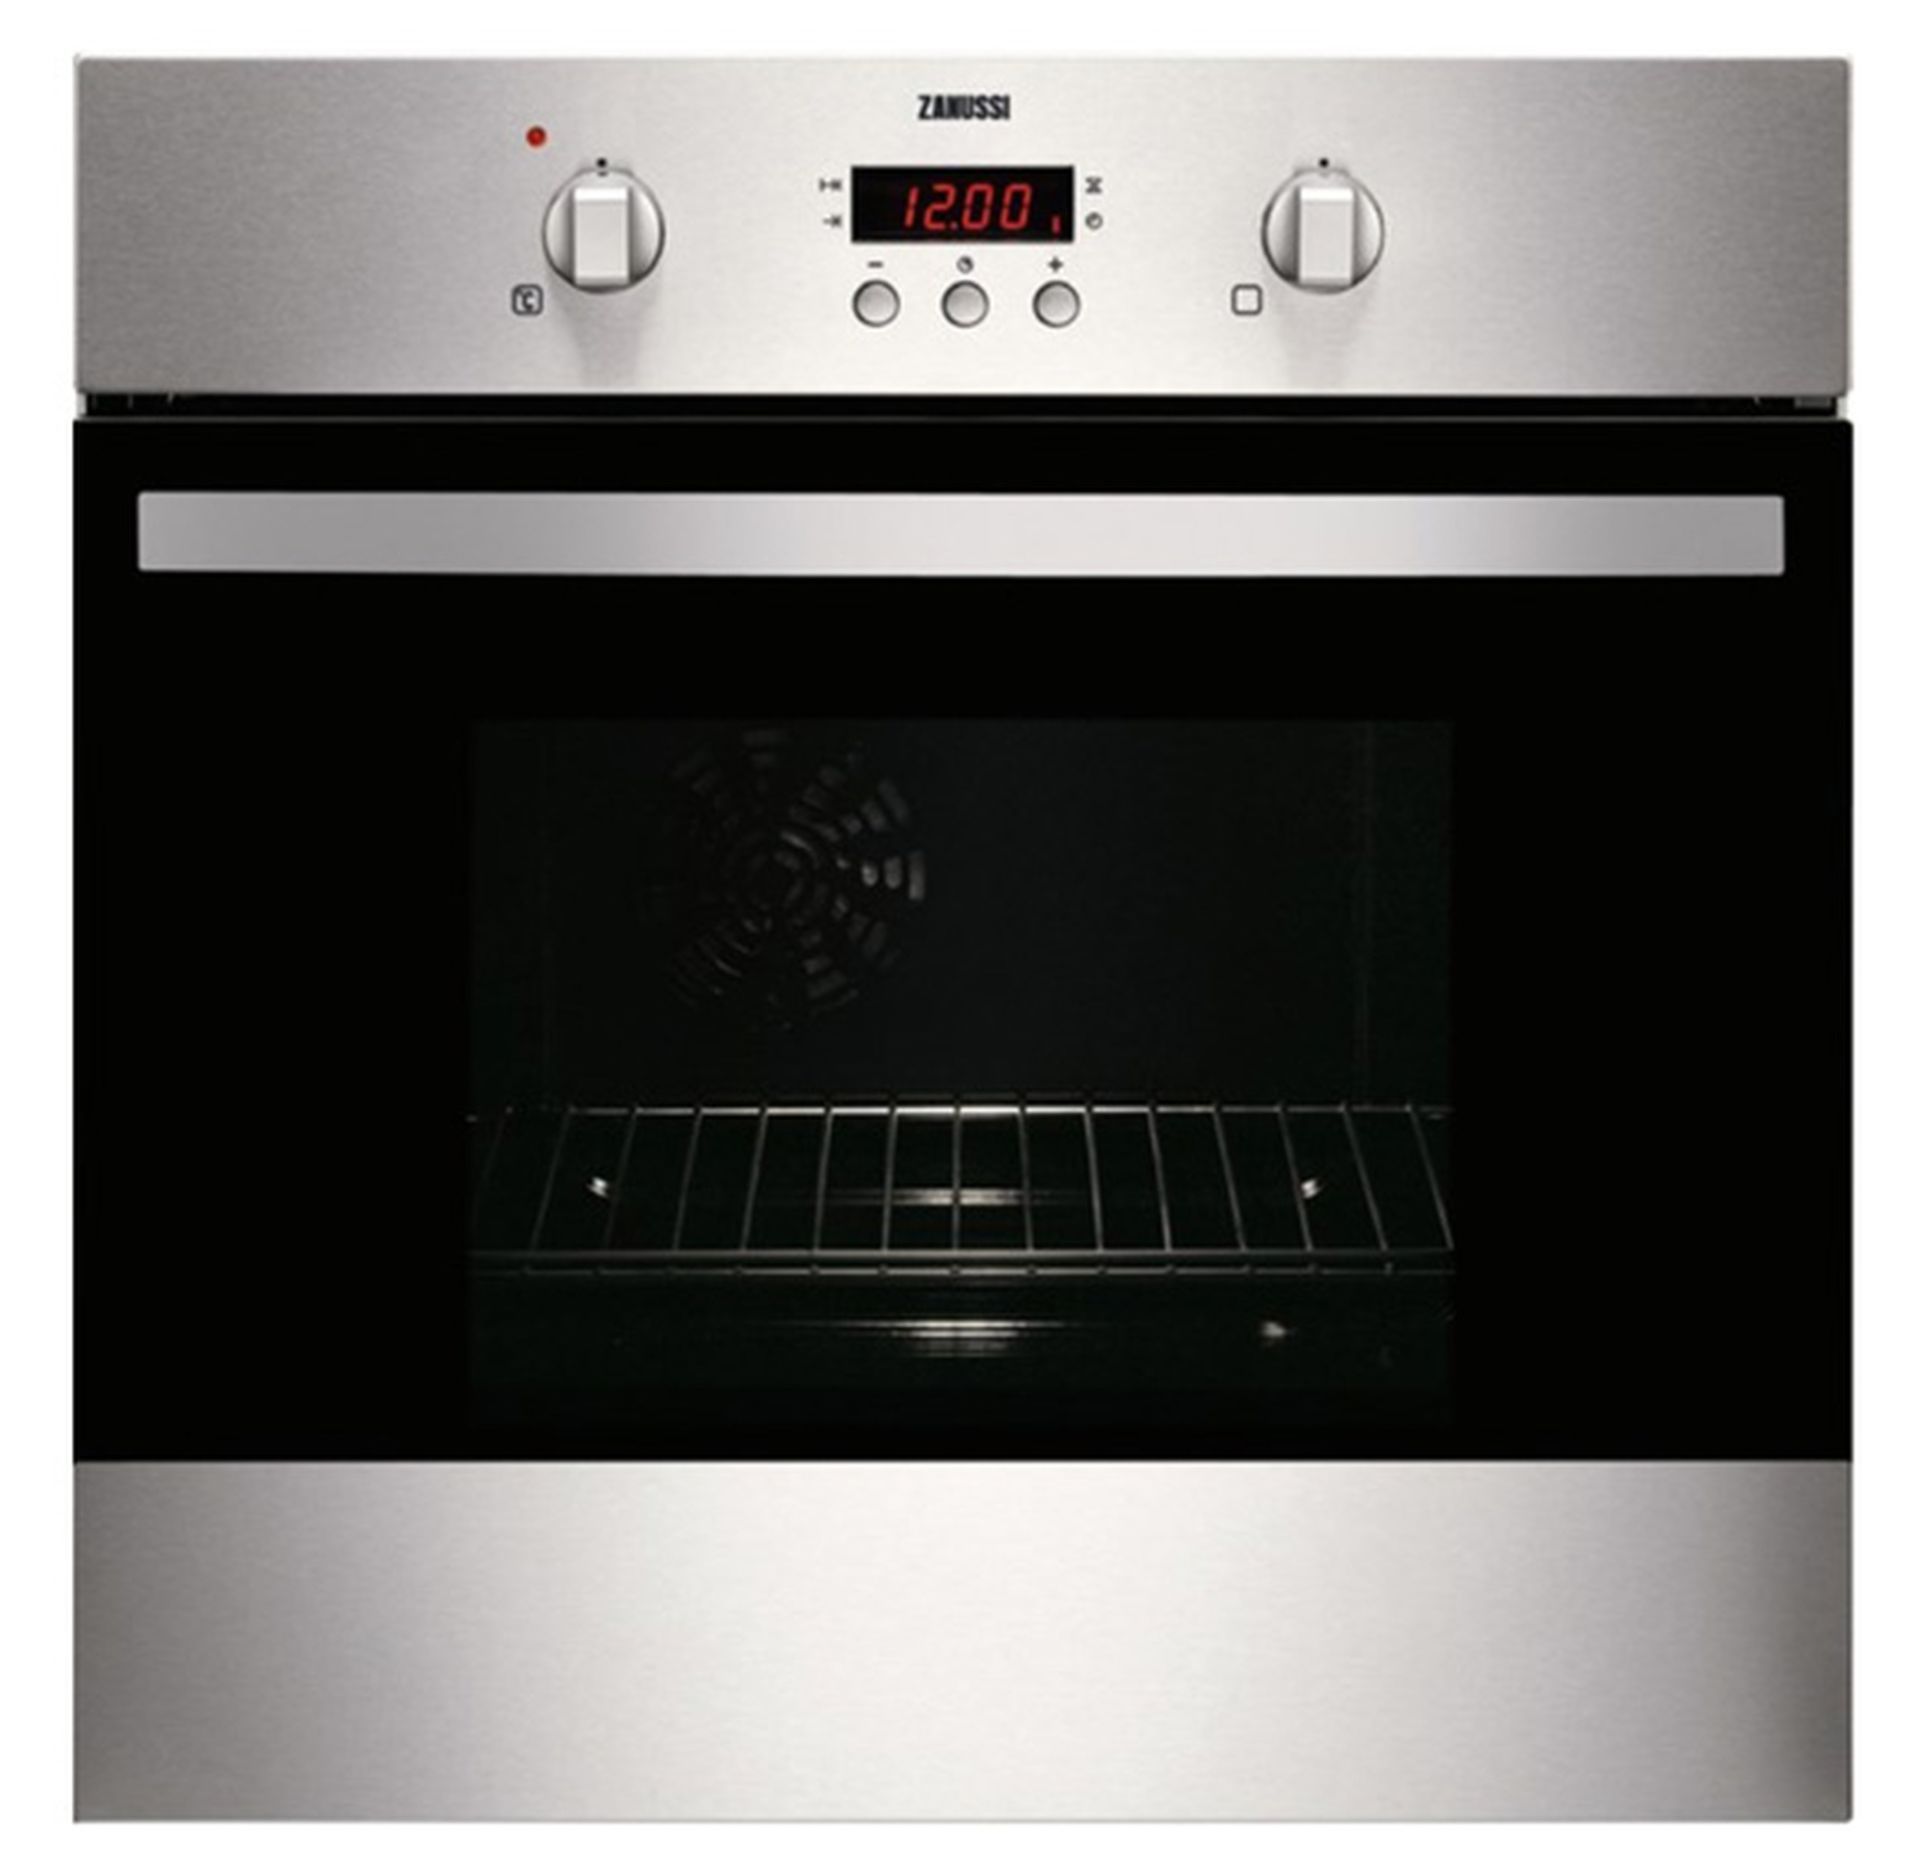 (A67) ZANUSSI, ZOB343X, BUILT IN SINGLE OVEN. RRP £329.00. Double glazed oven door, A energy rating,